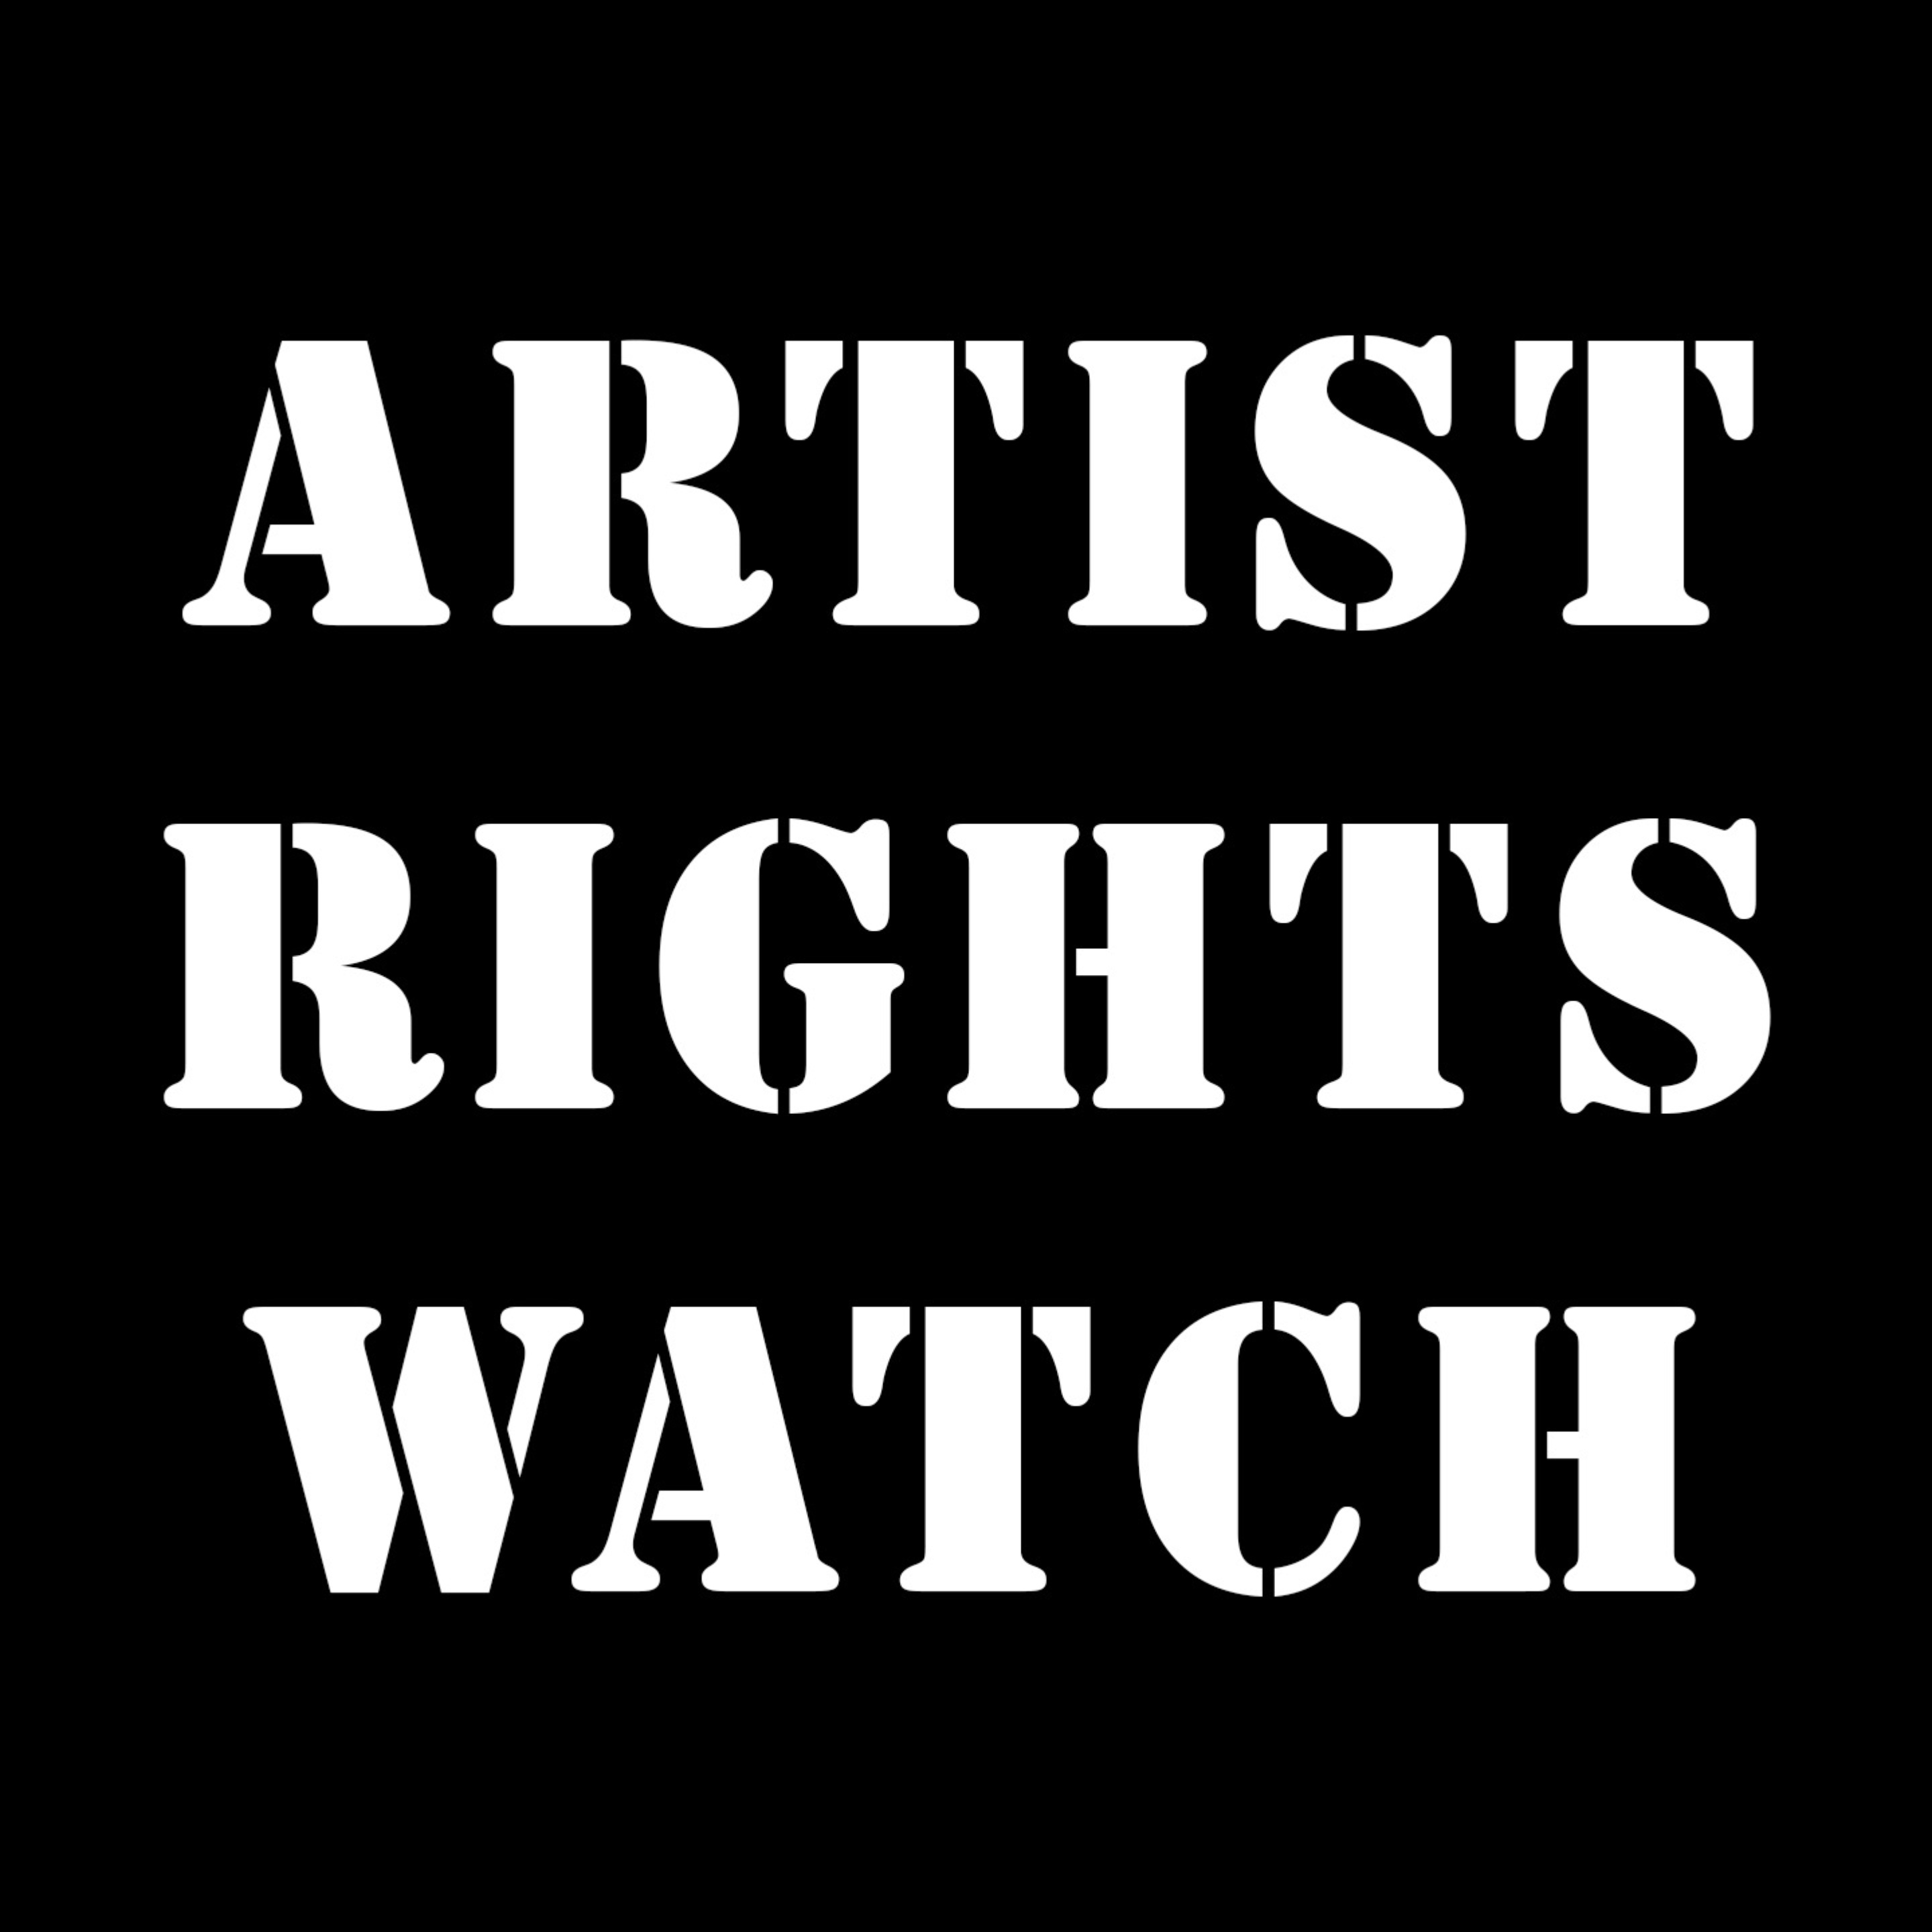 The Artist Rights Watch